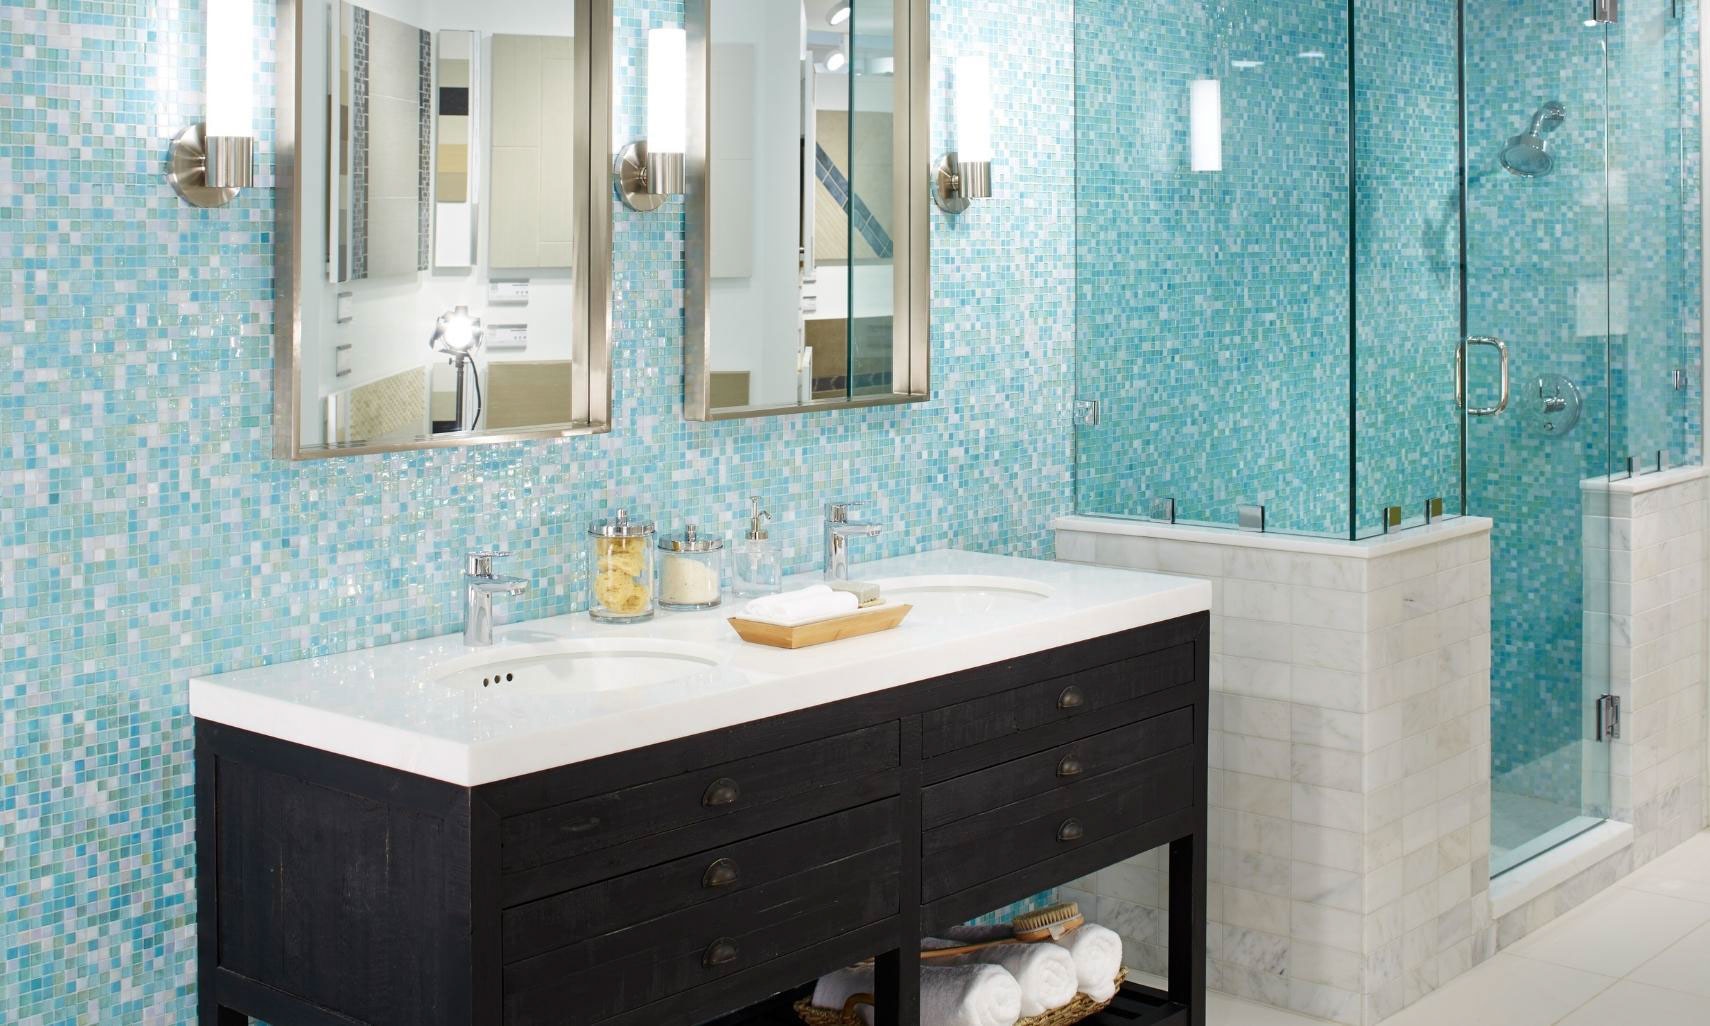 Bathroom with vanity wall and shower walls covered with blue, green, and white iridescent mosaic tile, dark wood vanity with dual sinks and mirrors.